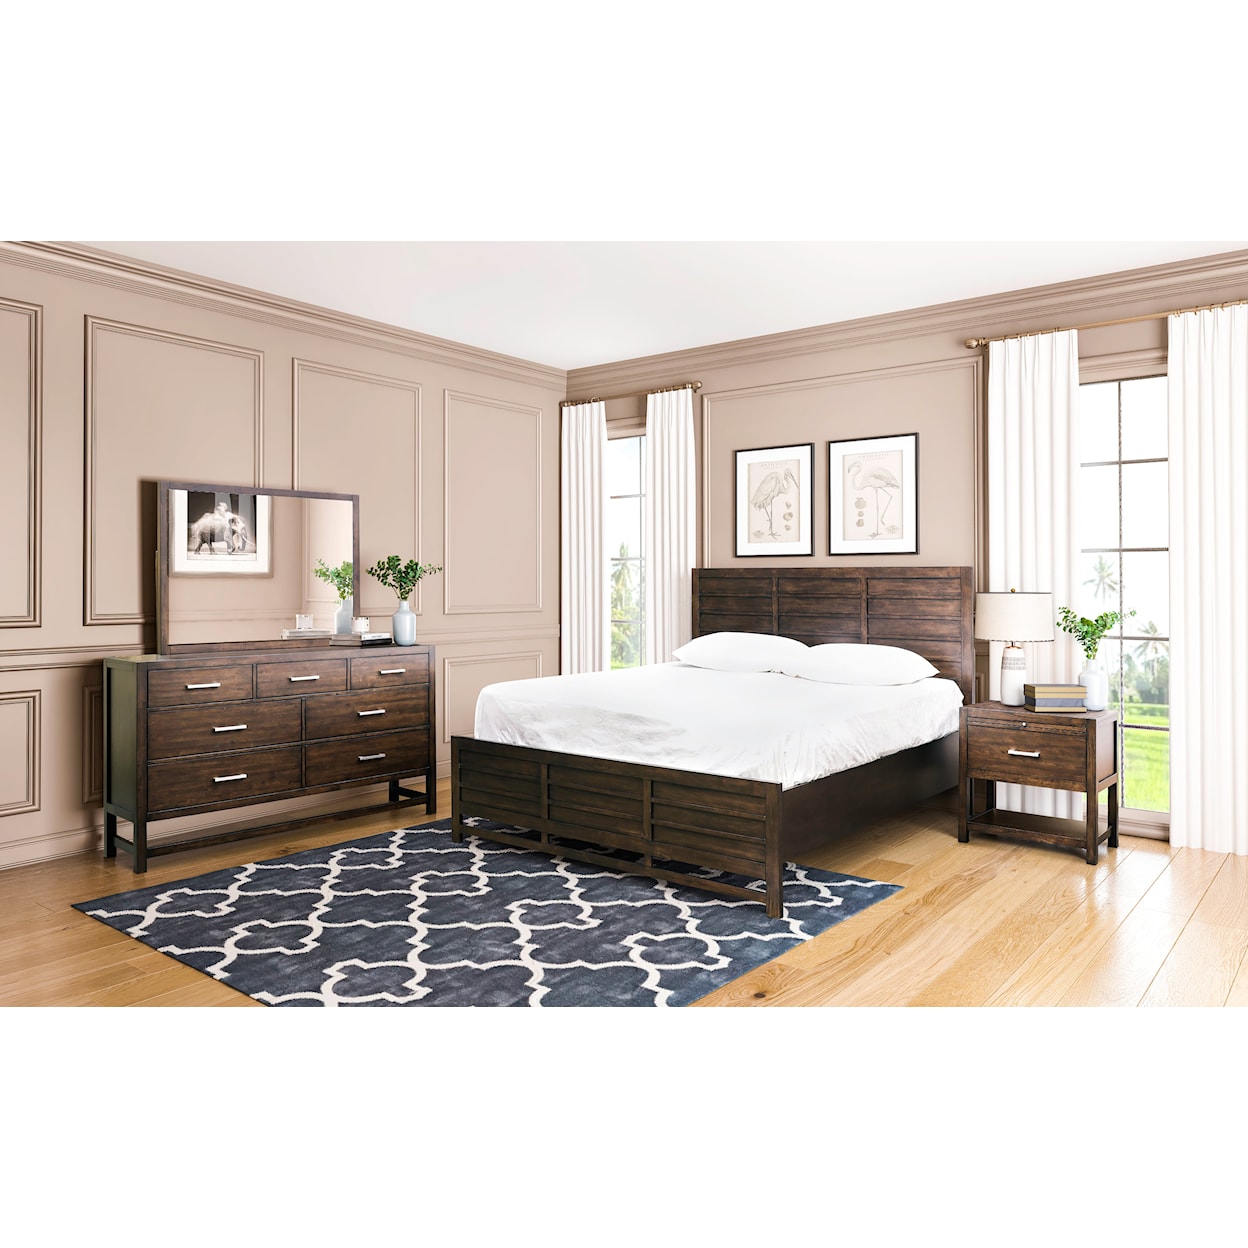 A-A Kendall Kind Panel Bed